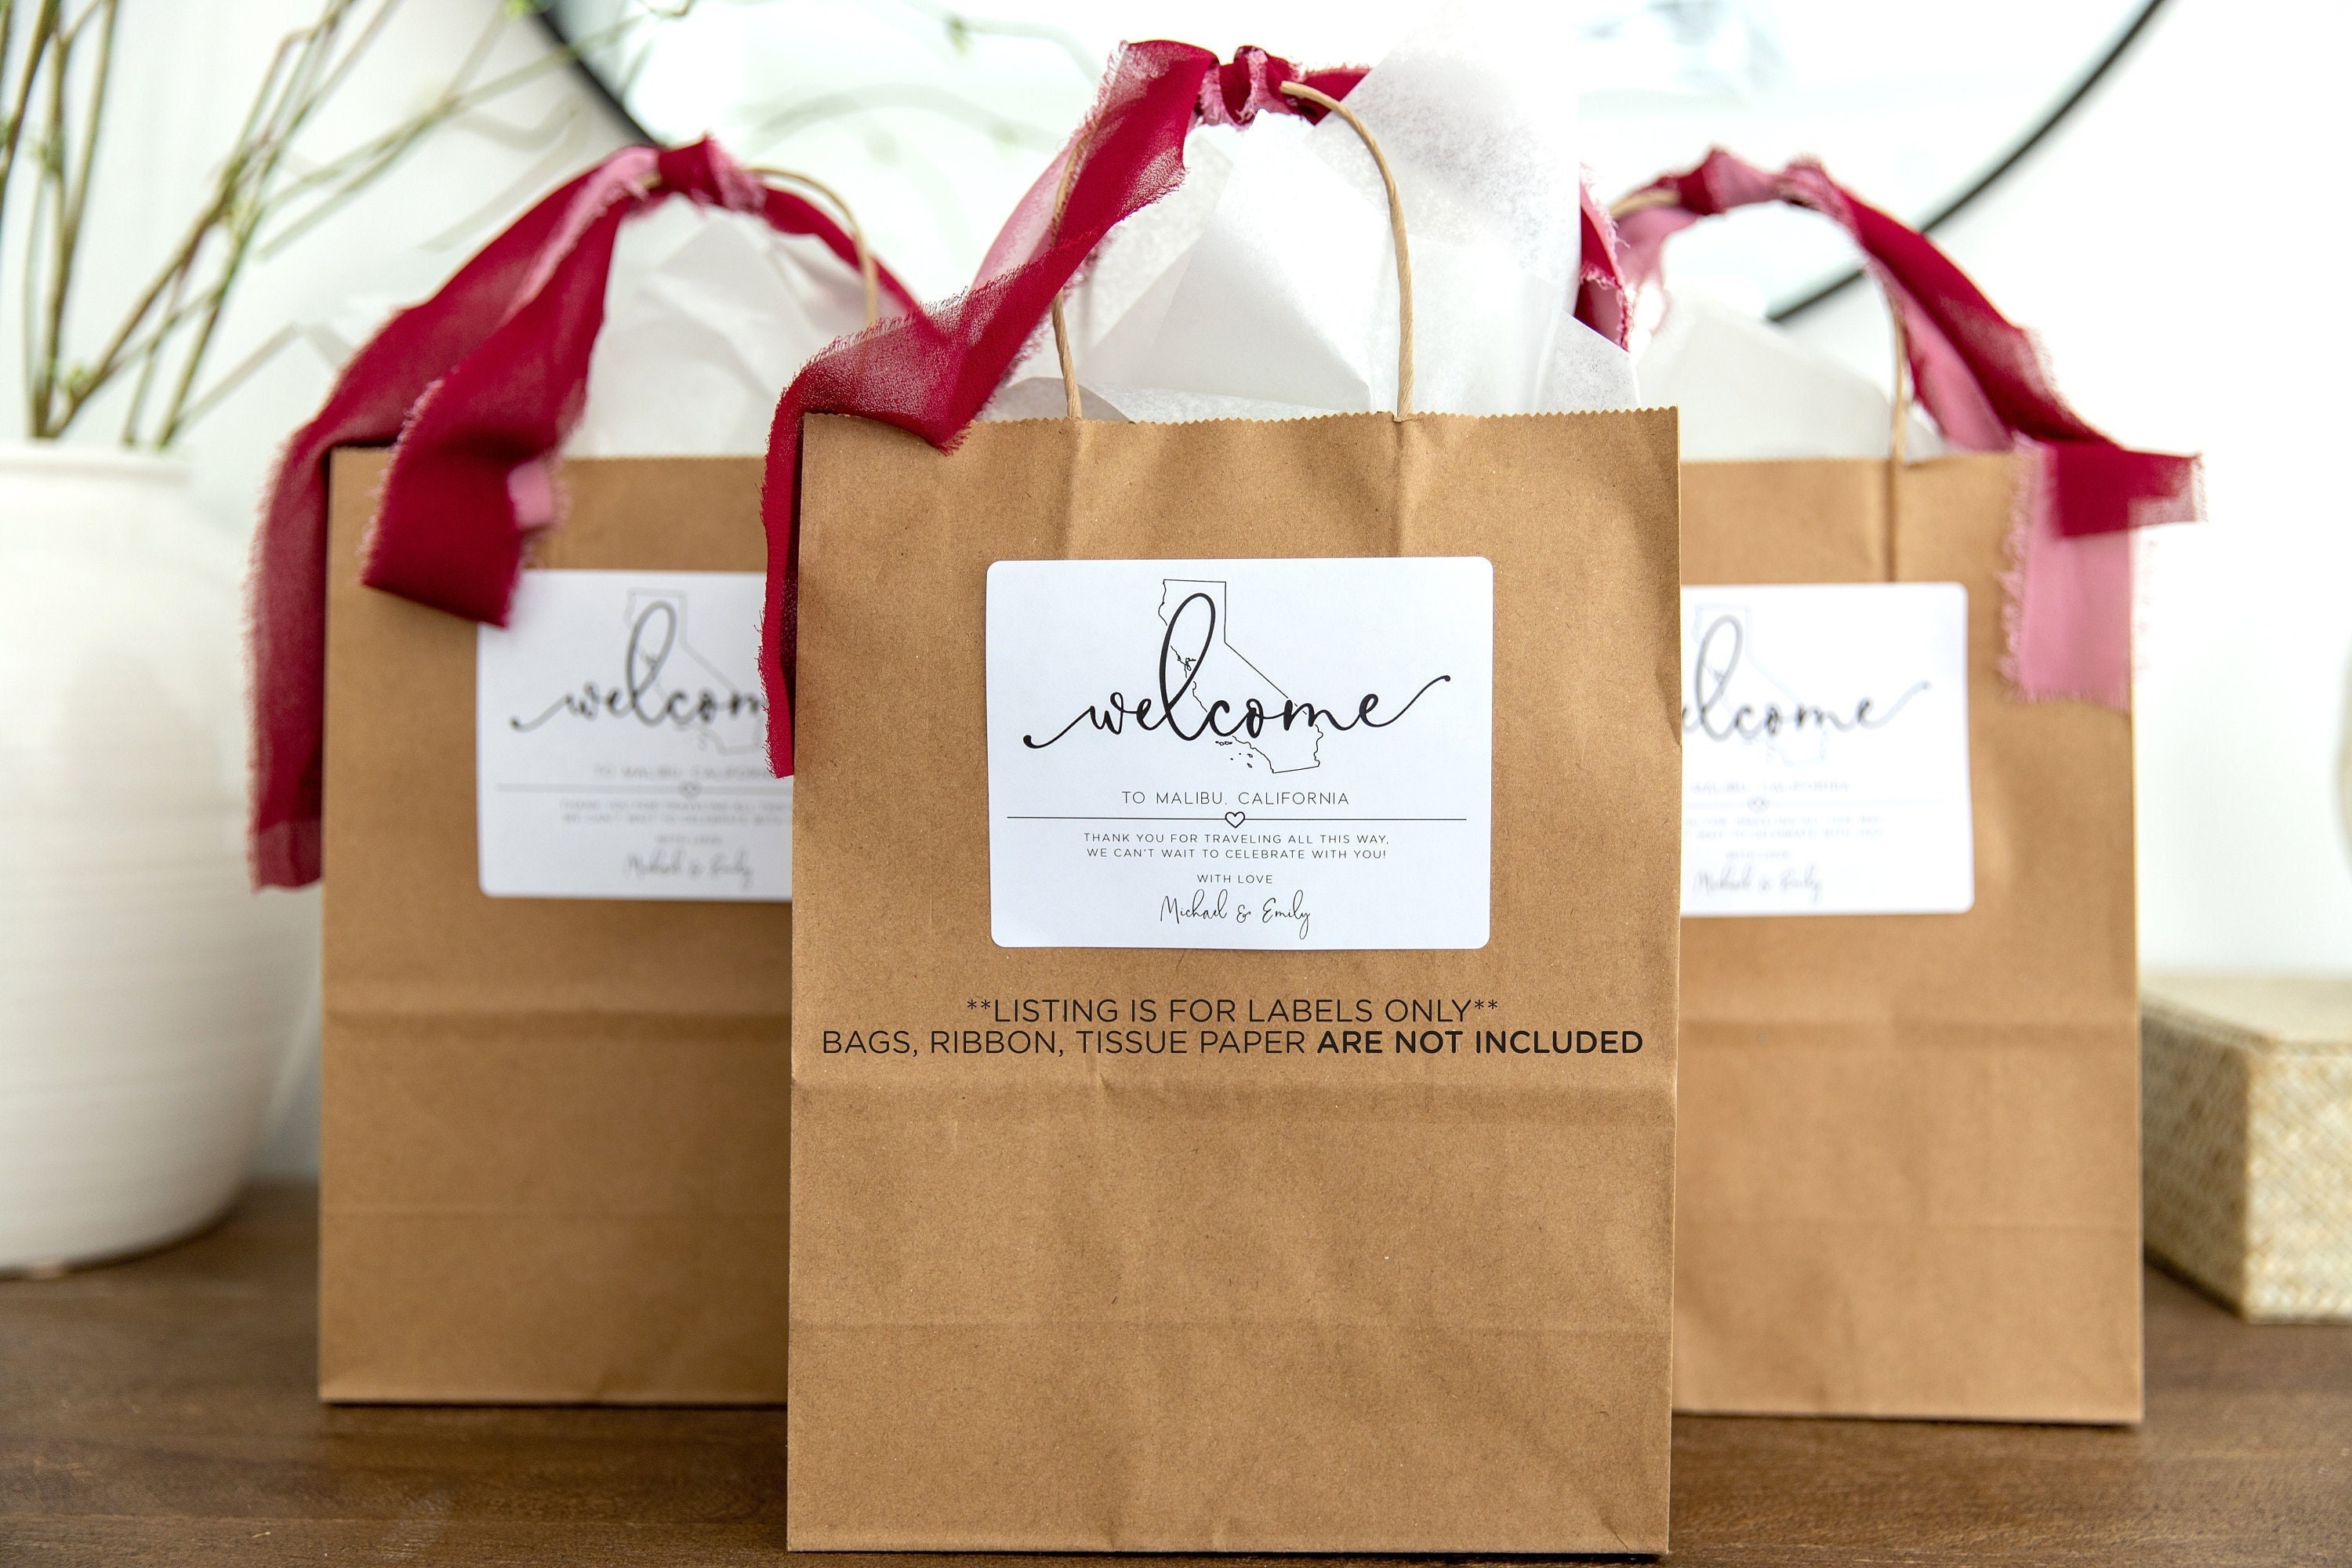 10 Pcs White Burlap Gift Bags with Handles for Bridesmaids, Weddings, Welcome  Bags, and More